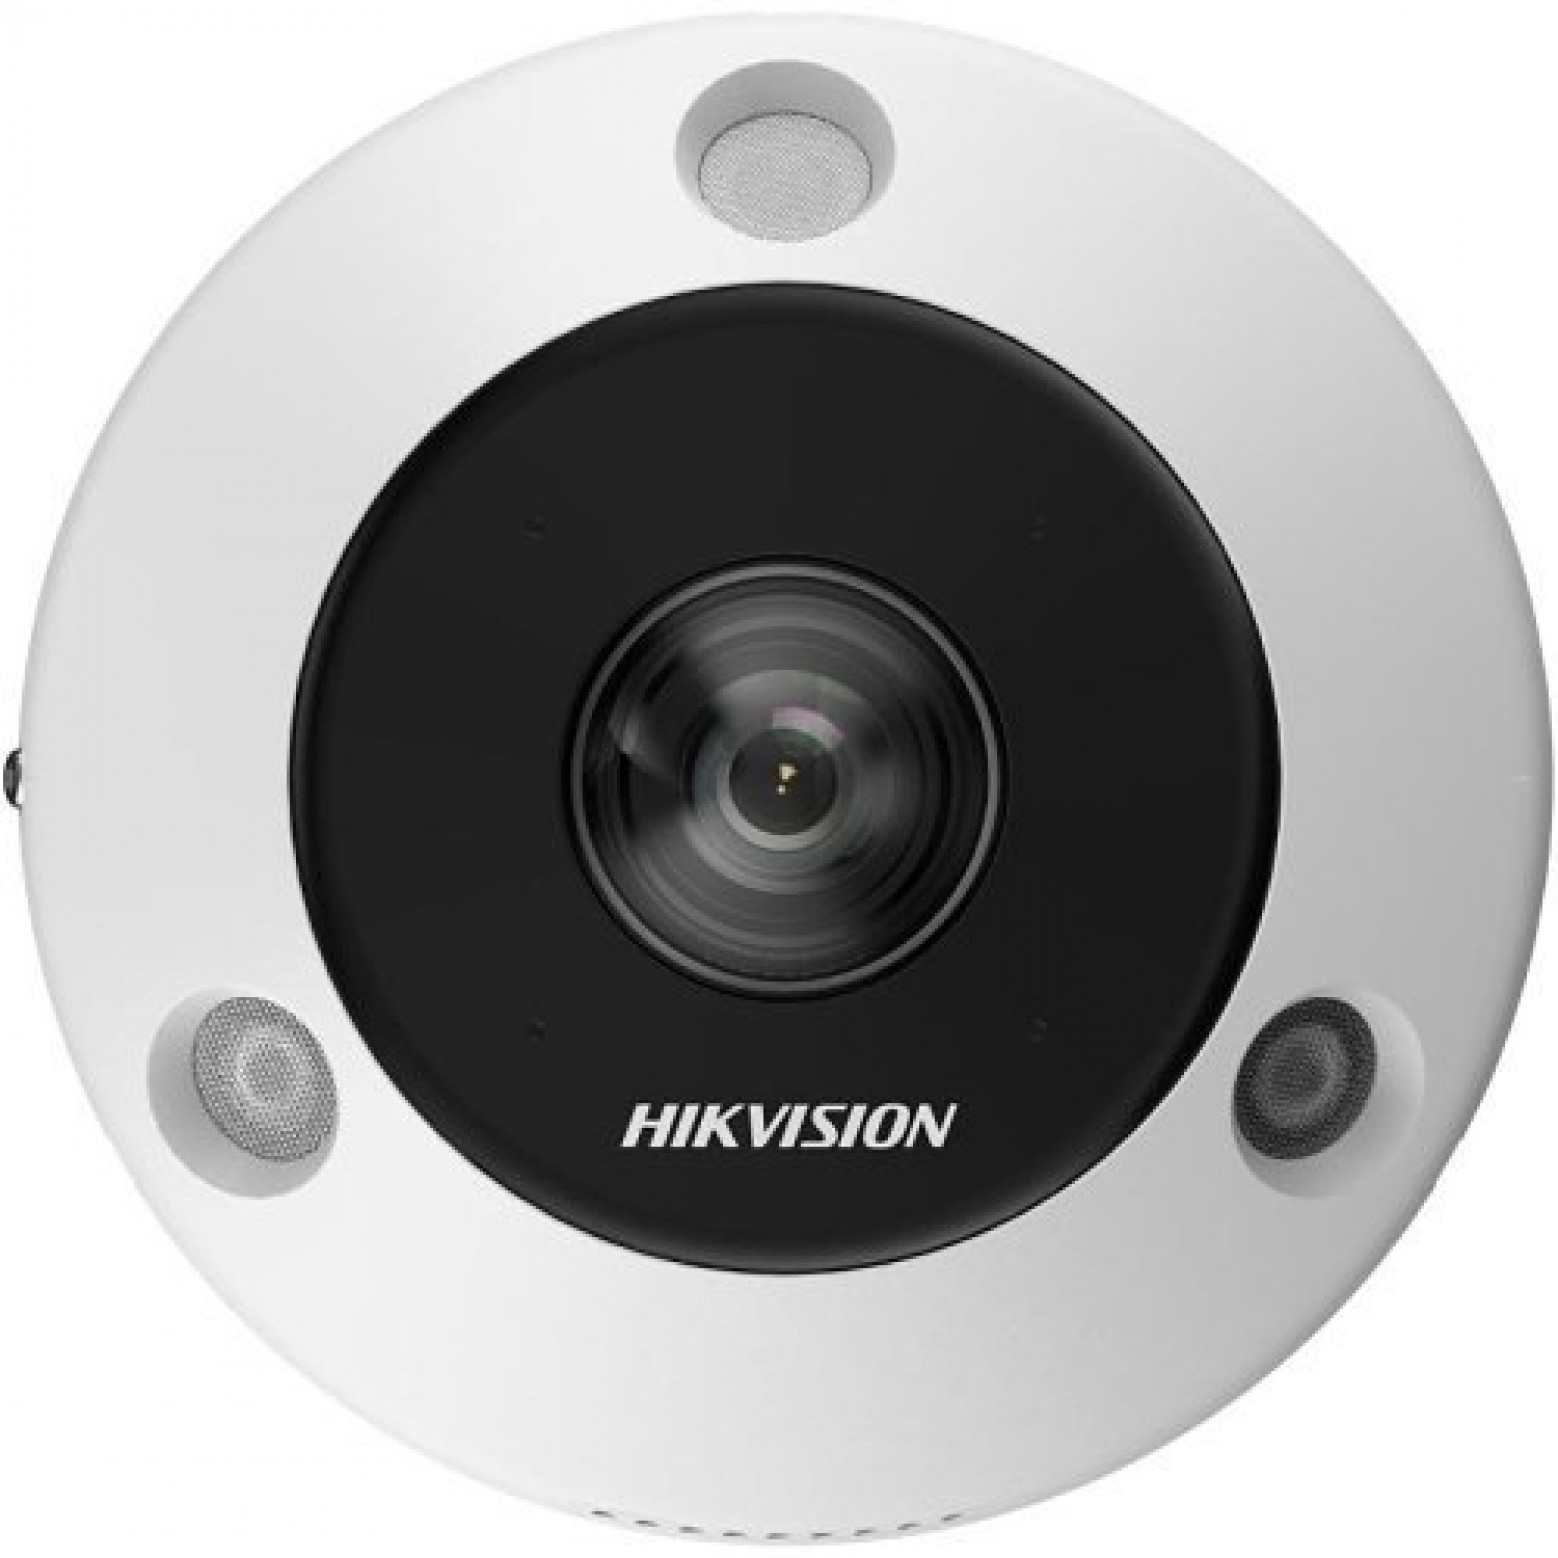 Hikvision - DS-2CD6365G1-IVS - DeepinView - Fisheye - Objectif 1,16MM - 6MP - IP - Wit